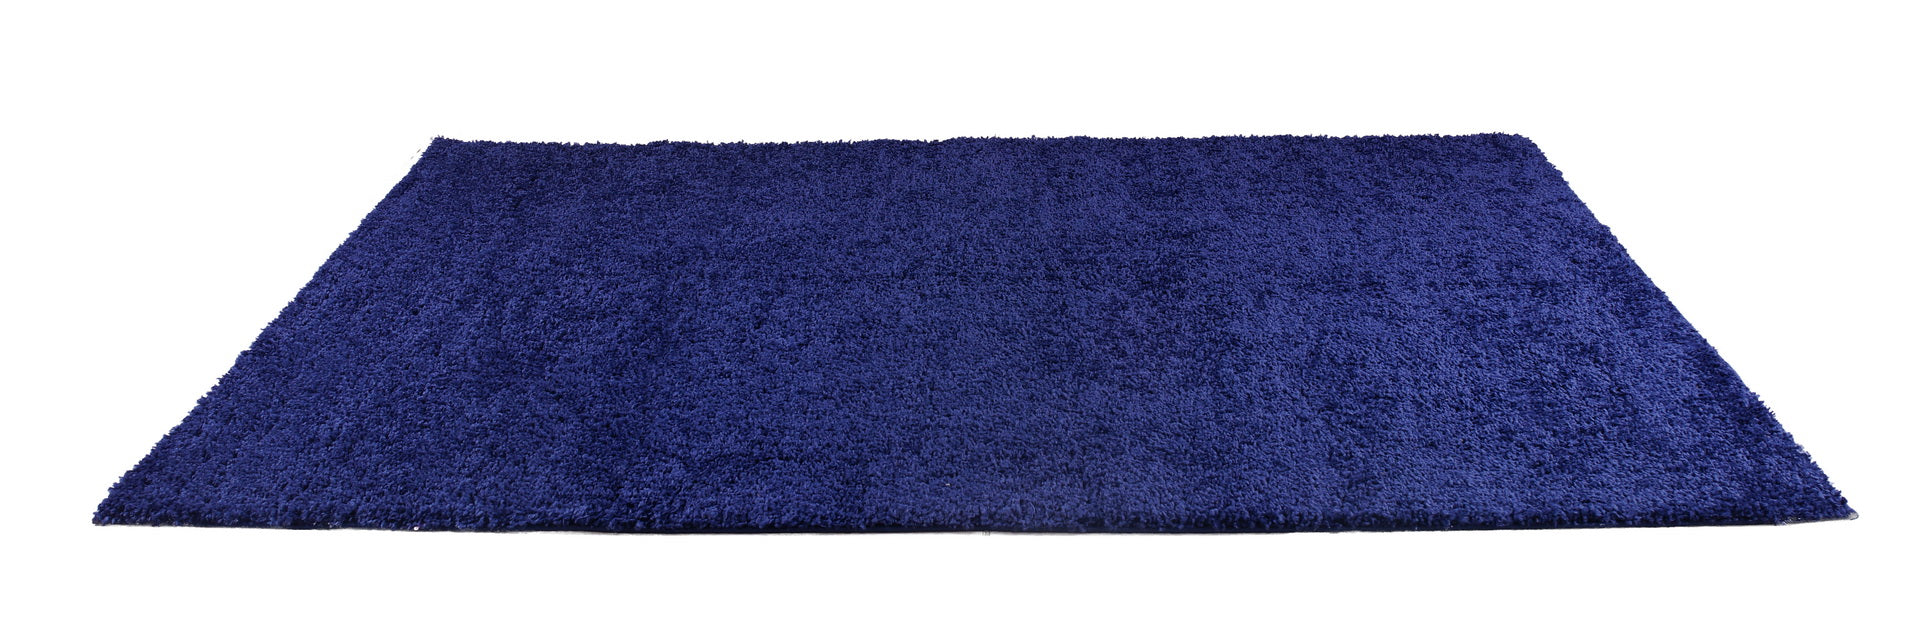 ladole rugs solid color shaggy meknes durable beautiful turkish indoor small mat doormat rug in navy blue 110 x 211 57cm x 90cm 2x8, 3x10, 2x10 ft Long Runner Rug, Hallway, Balcony, Entry Way, Kitchen, Stairs